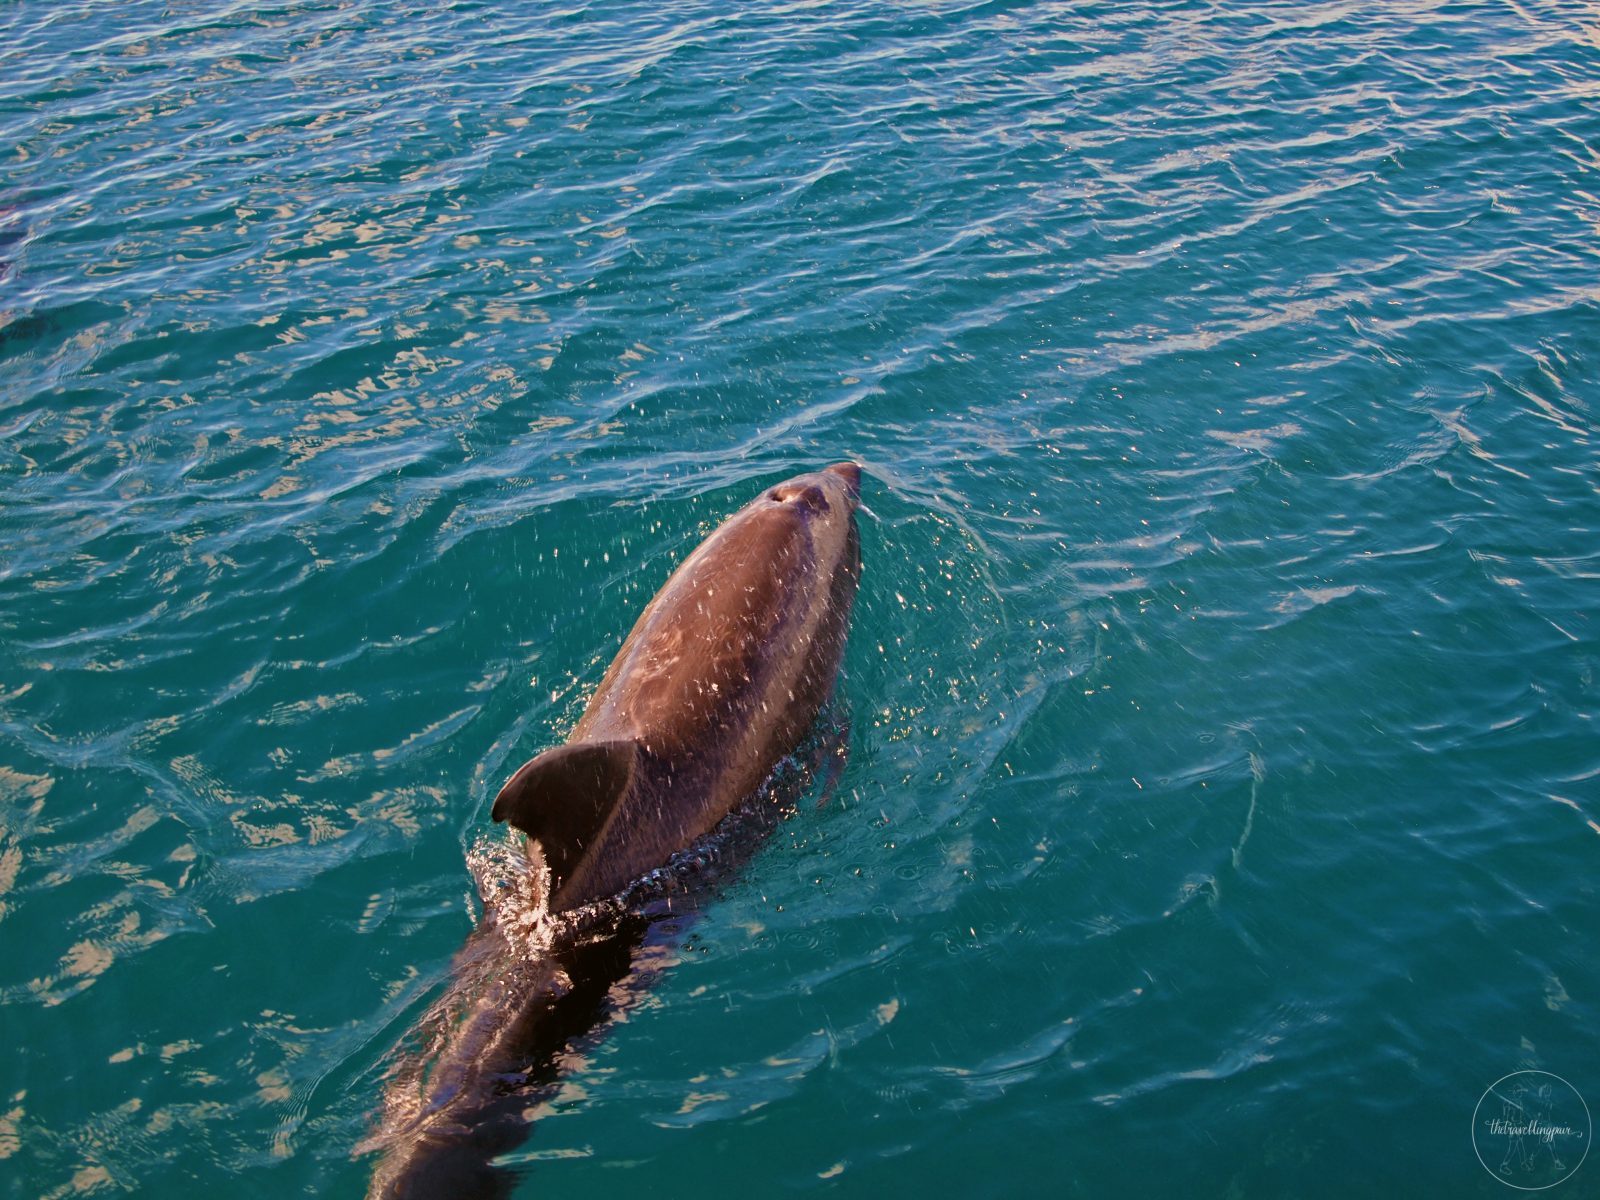 Dolphin at the Bay of Islands